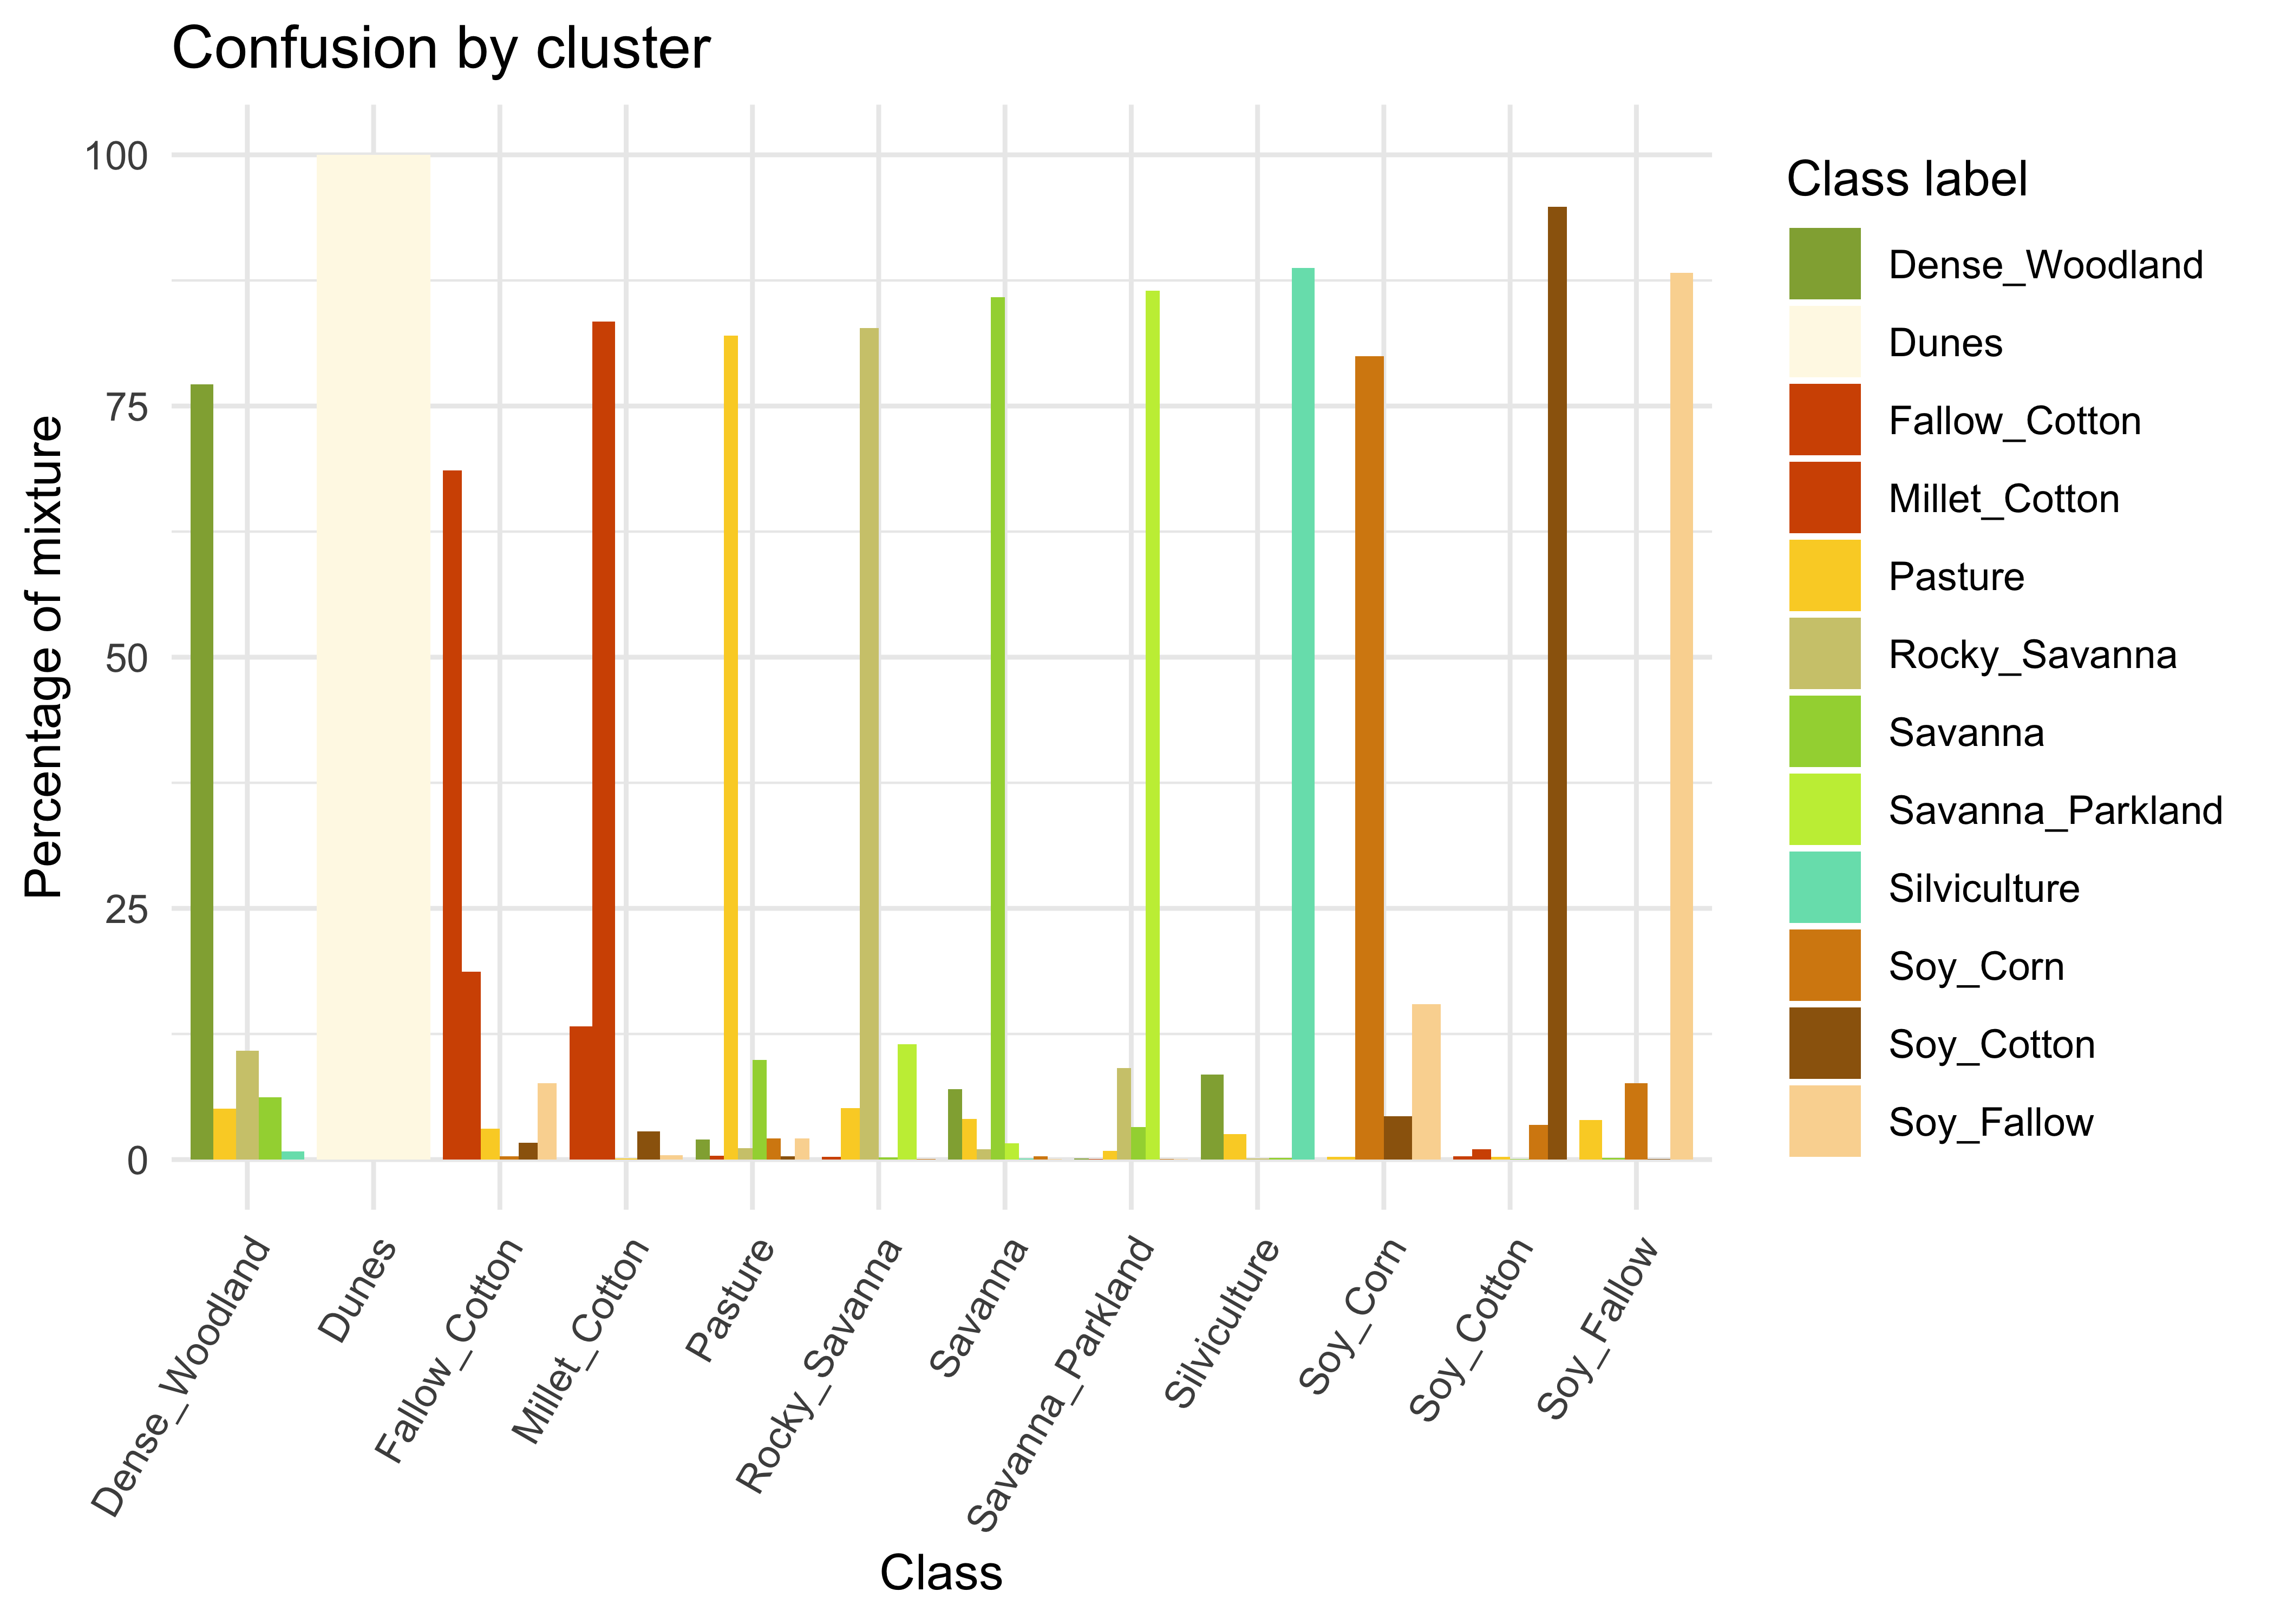 Confusion by cluster for the balanced dataset (Source: Authors).